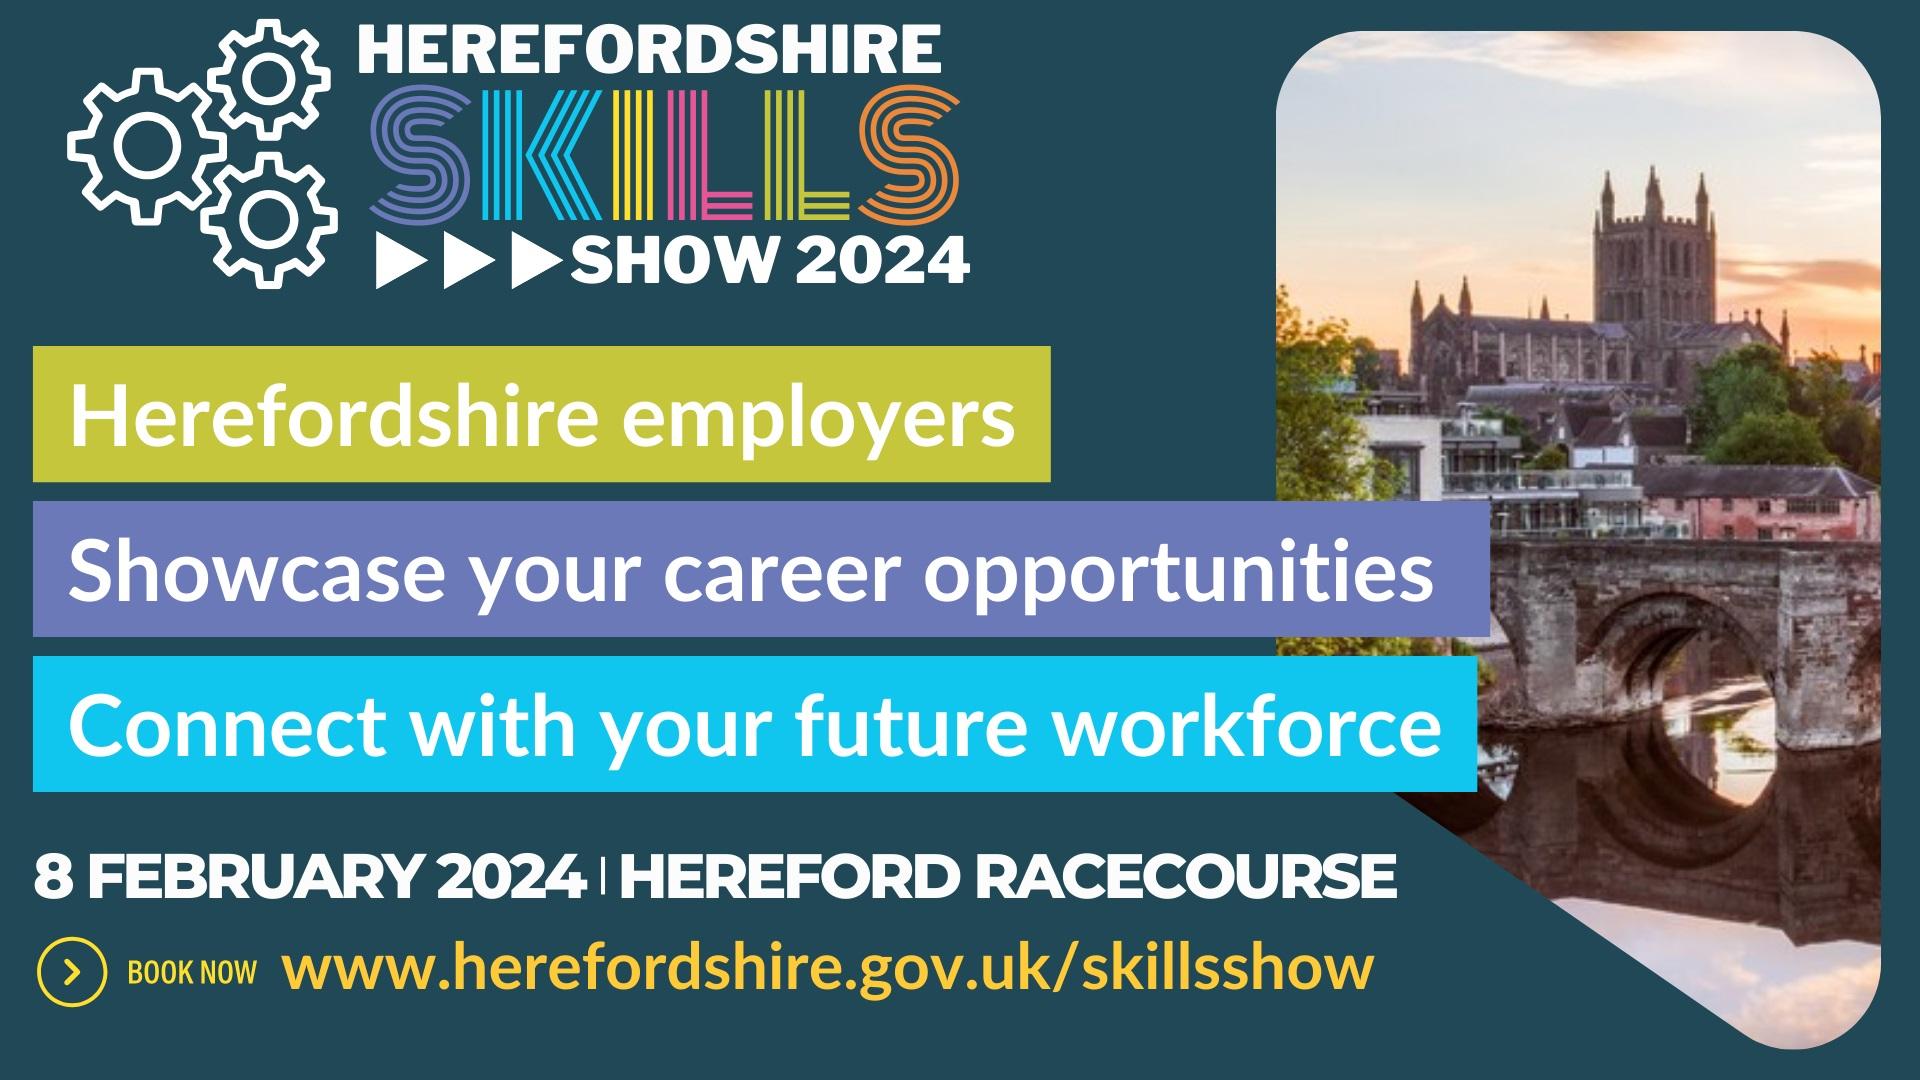 Herefordshire employers Showcase your career opportunities, connect with your future workforce on 8 Feb 2024, at Hereford racecourse